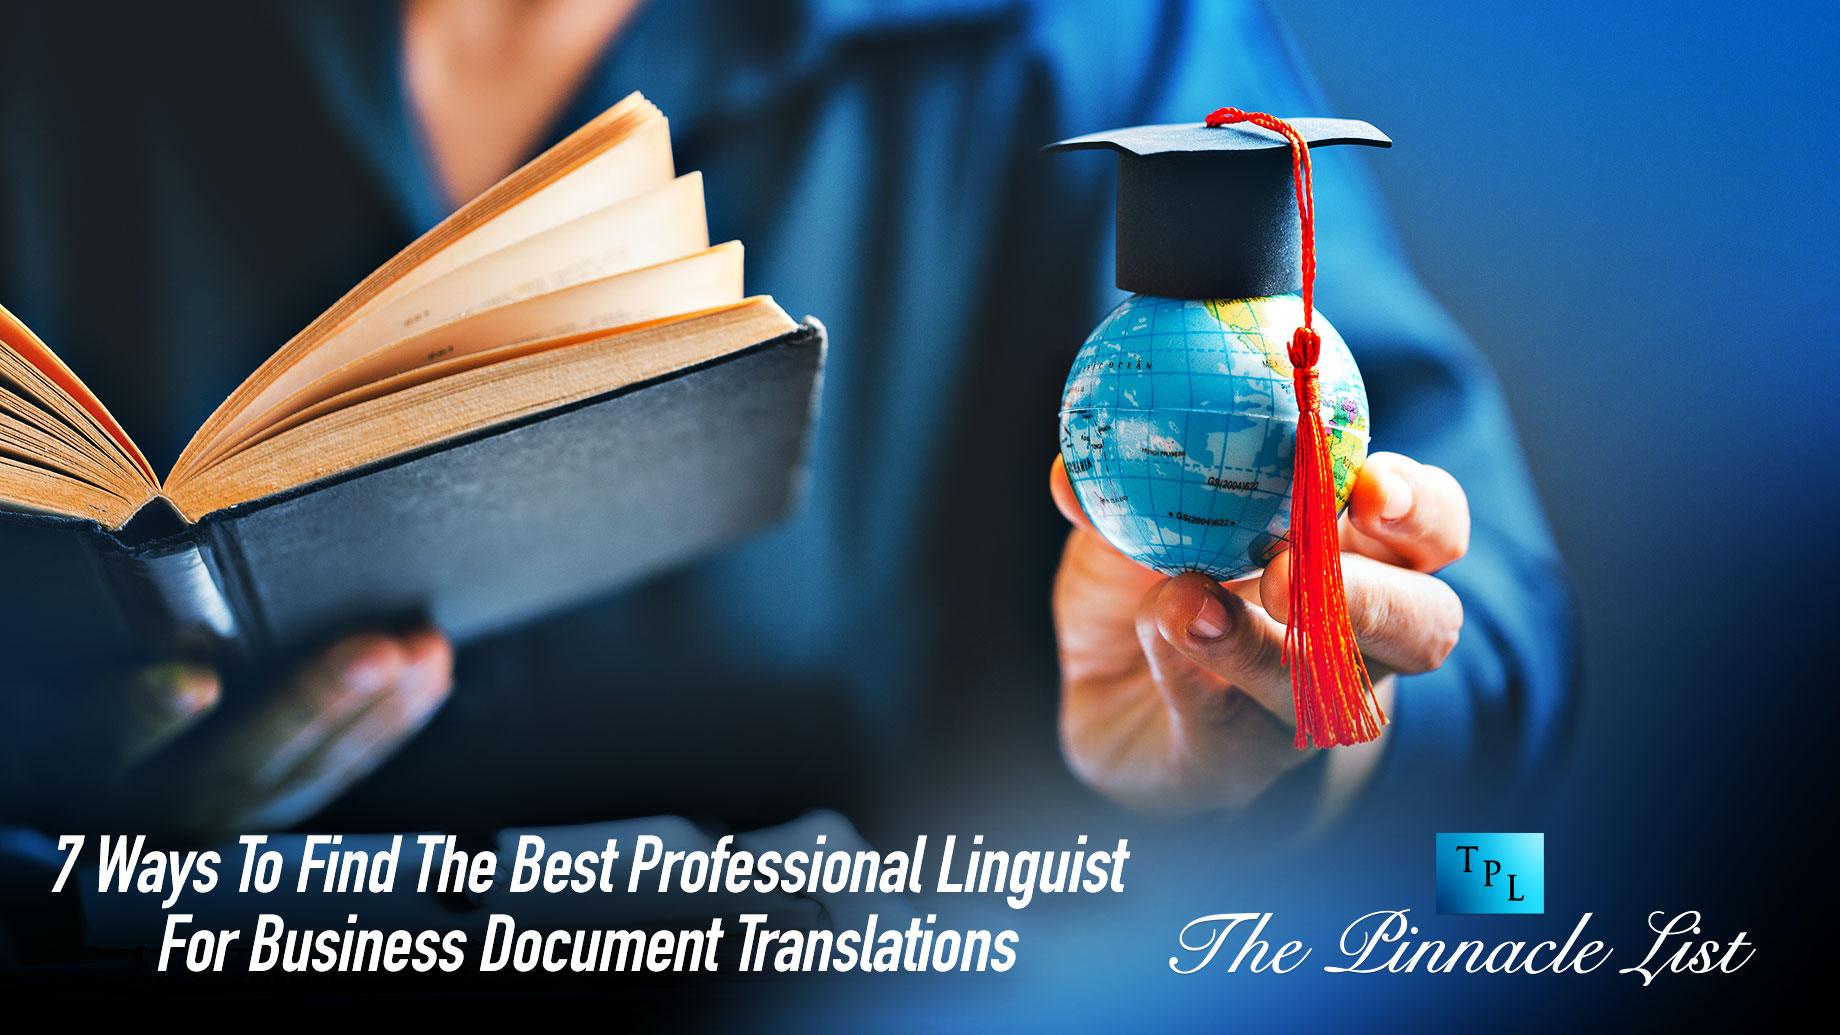 7 Ways To Find The Best Professional Linguist For Business Document Translations